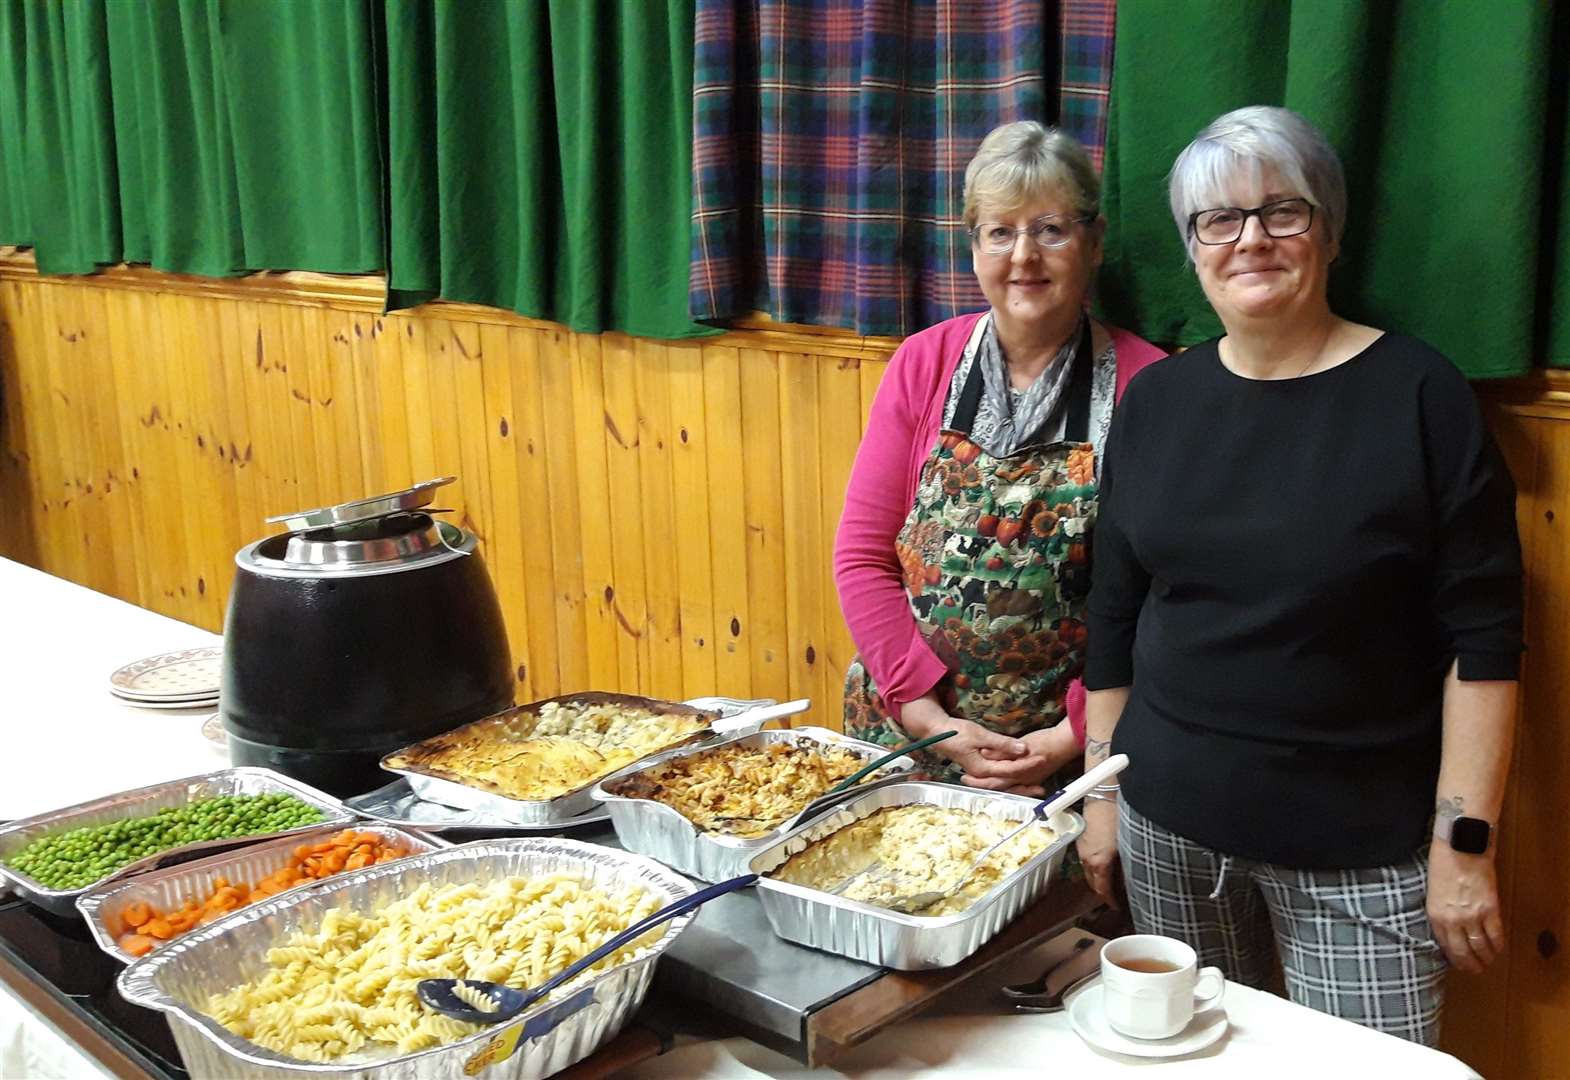 Tracy Campbell (right) and Penny Duncan at the serving station.